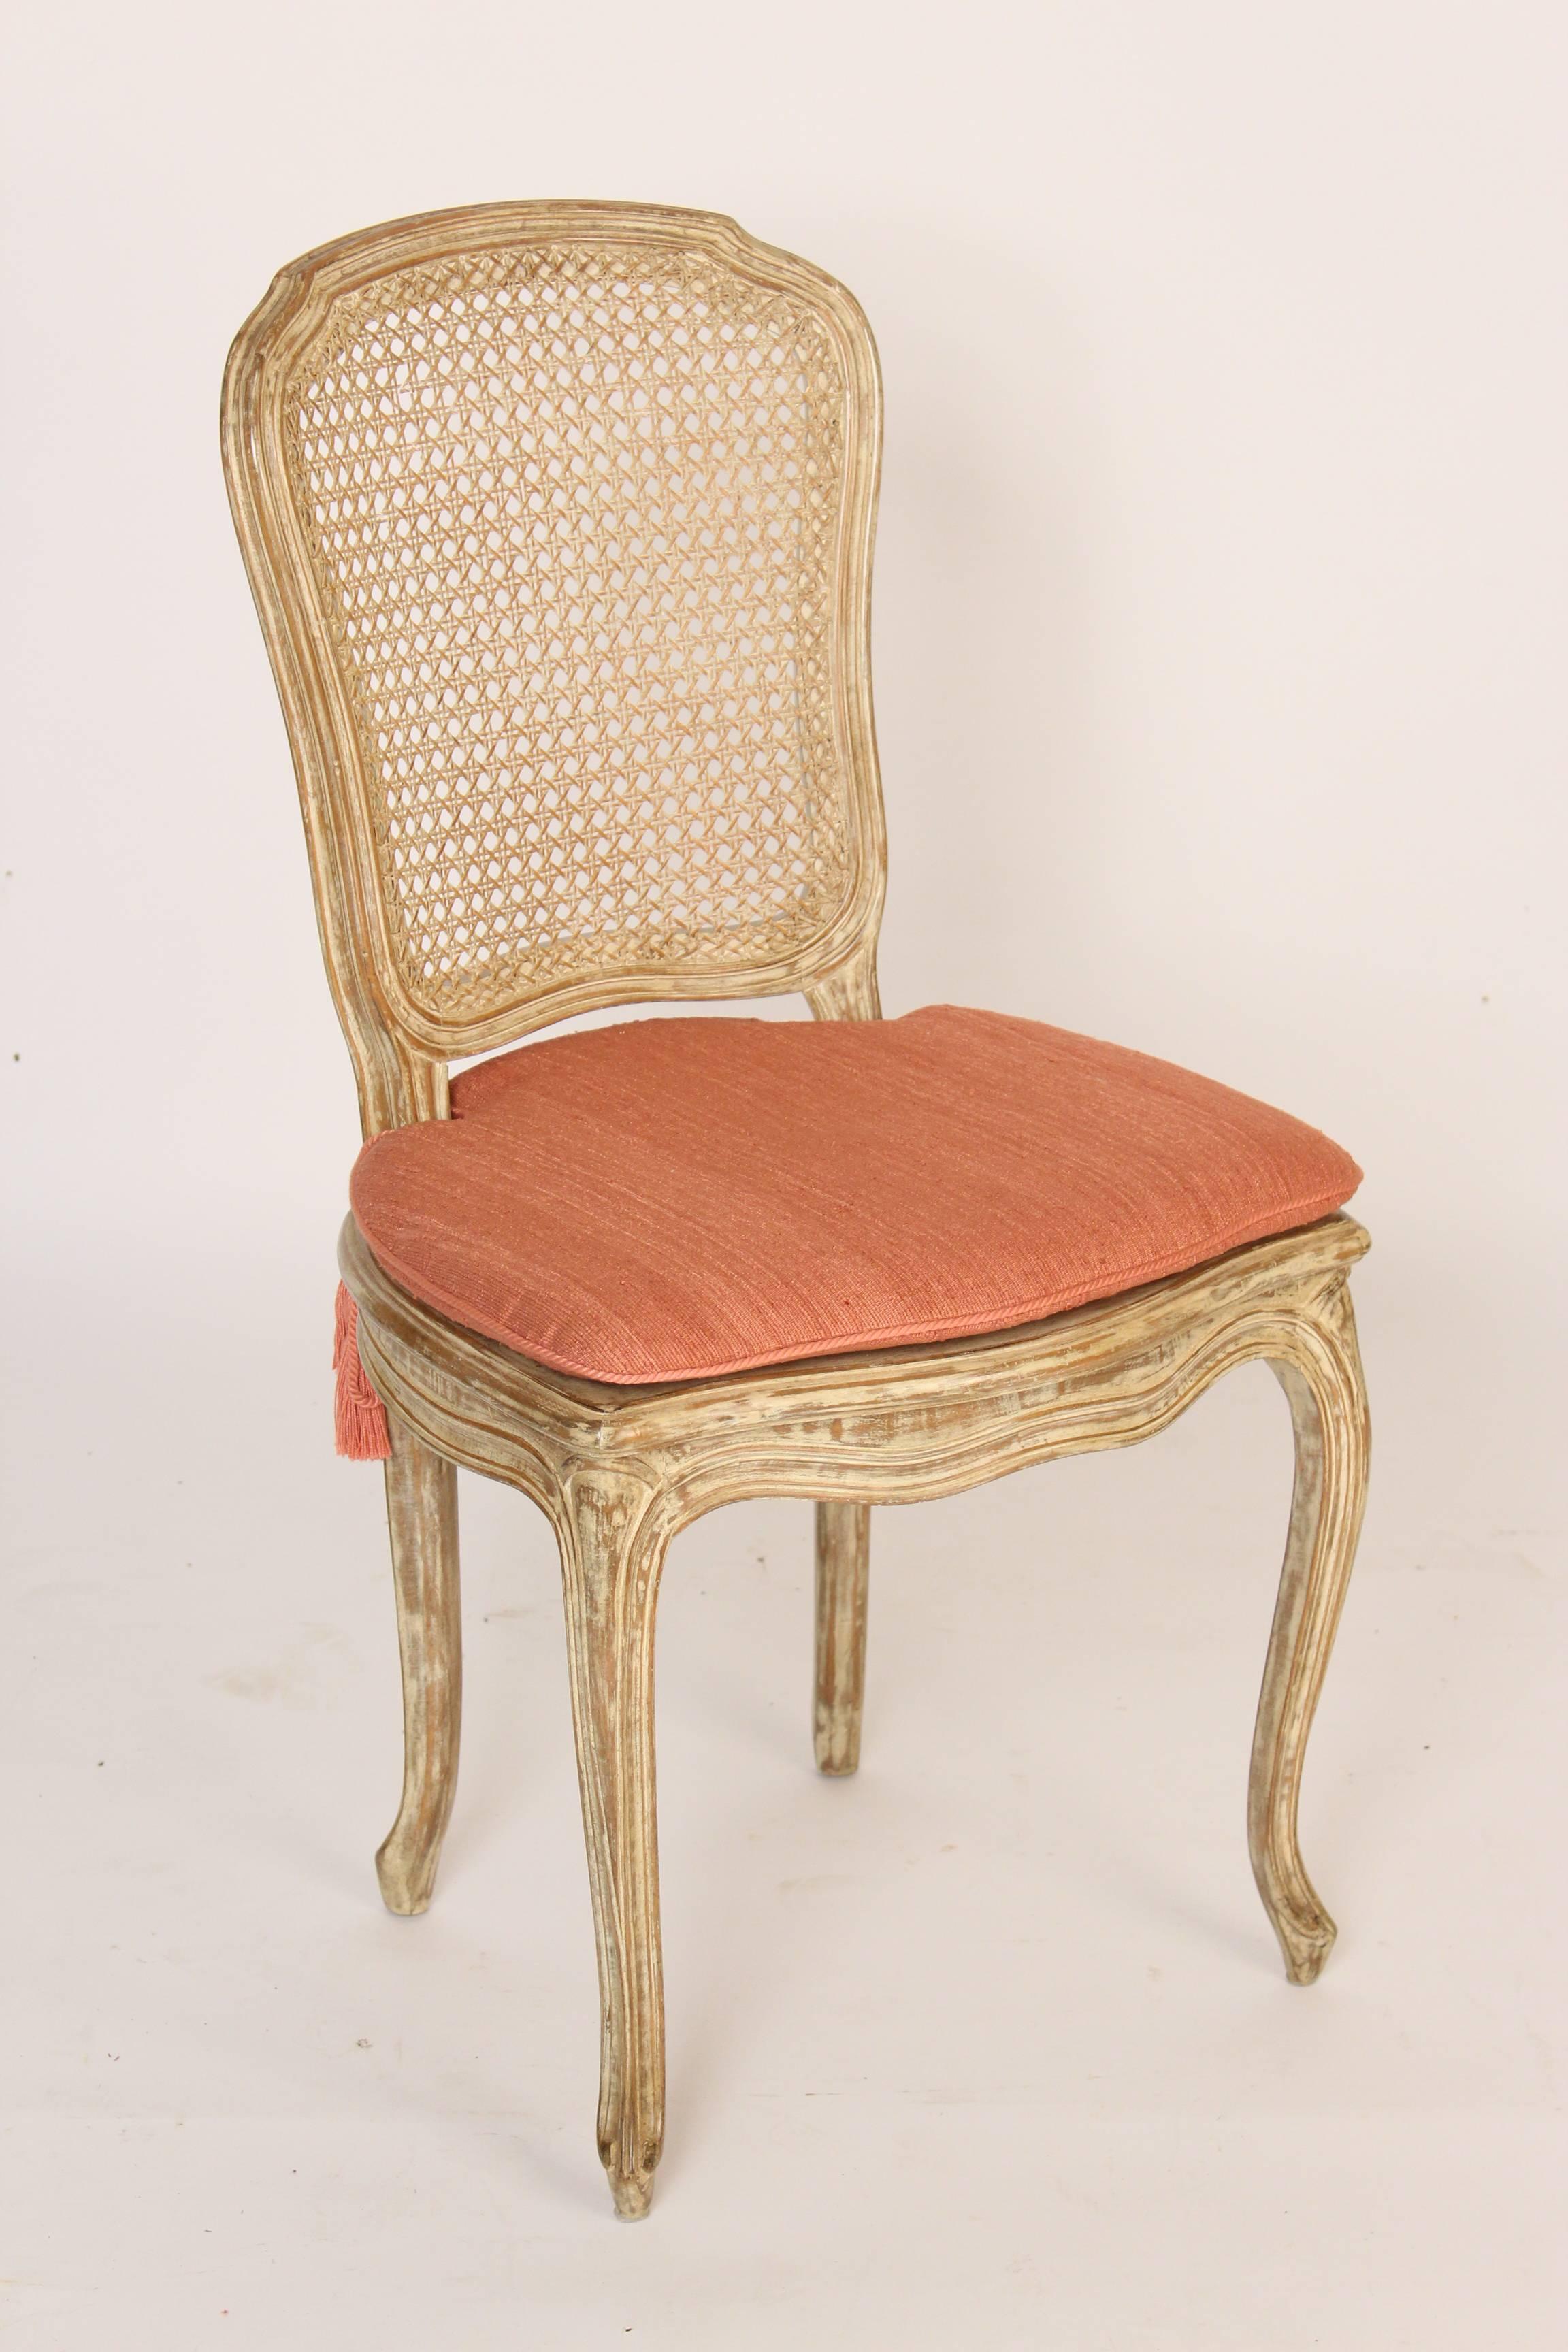 Set of ten (eight shown) painted Louis XV style dining room chairs, late 20th century. The paint has a glazed finish. All of the frames are tight. The caning on both backs and seats as well as the upholstery is in excellent condition.